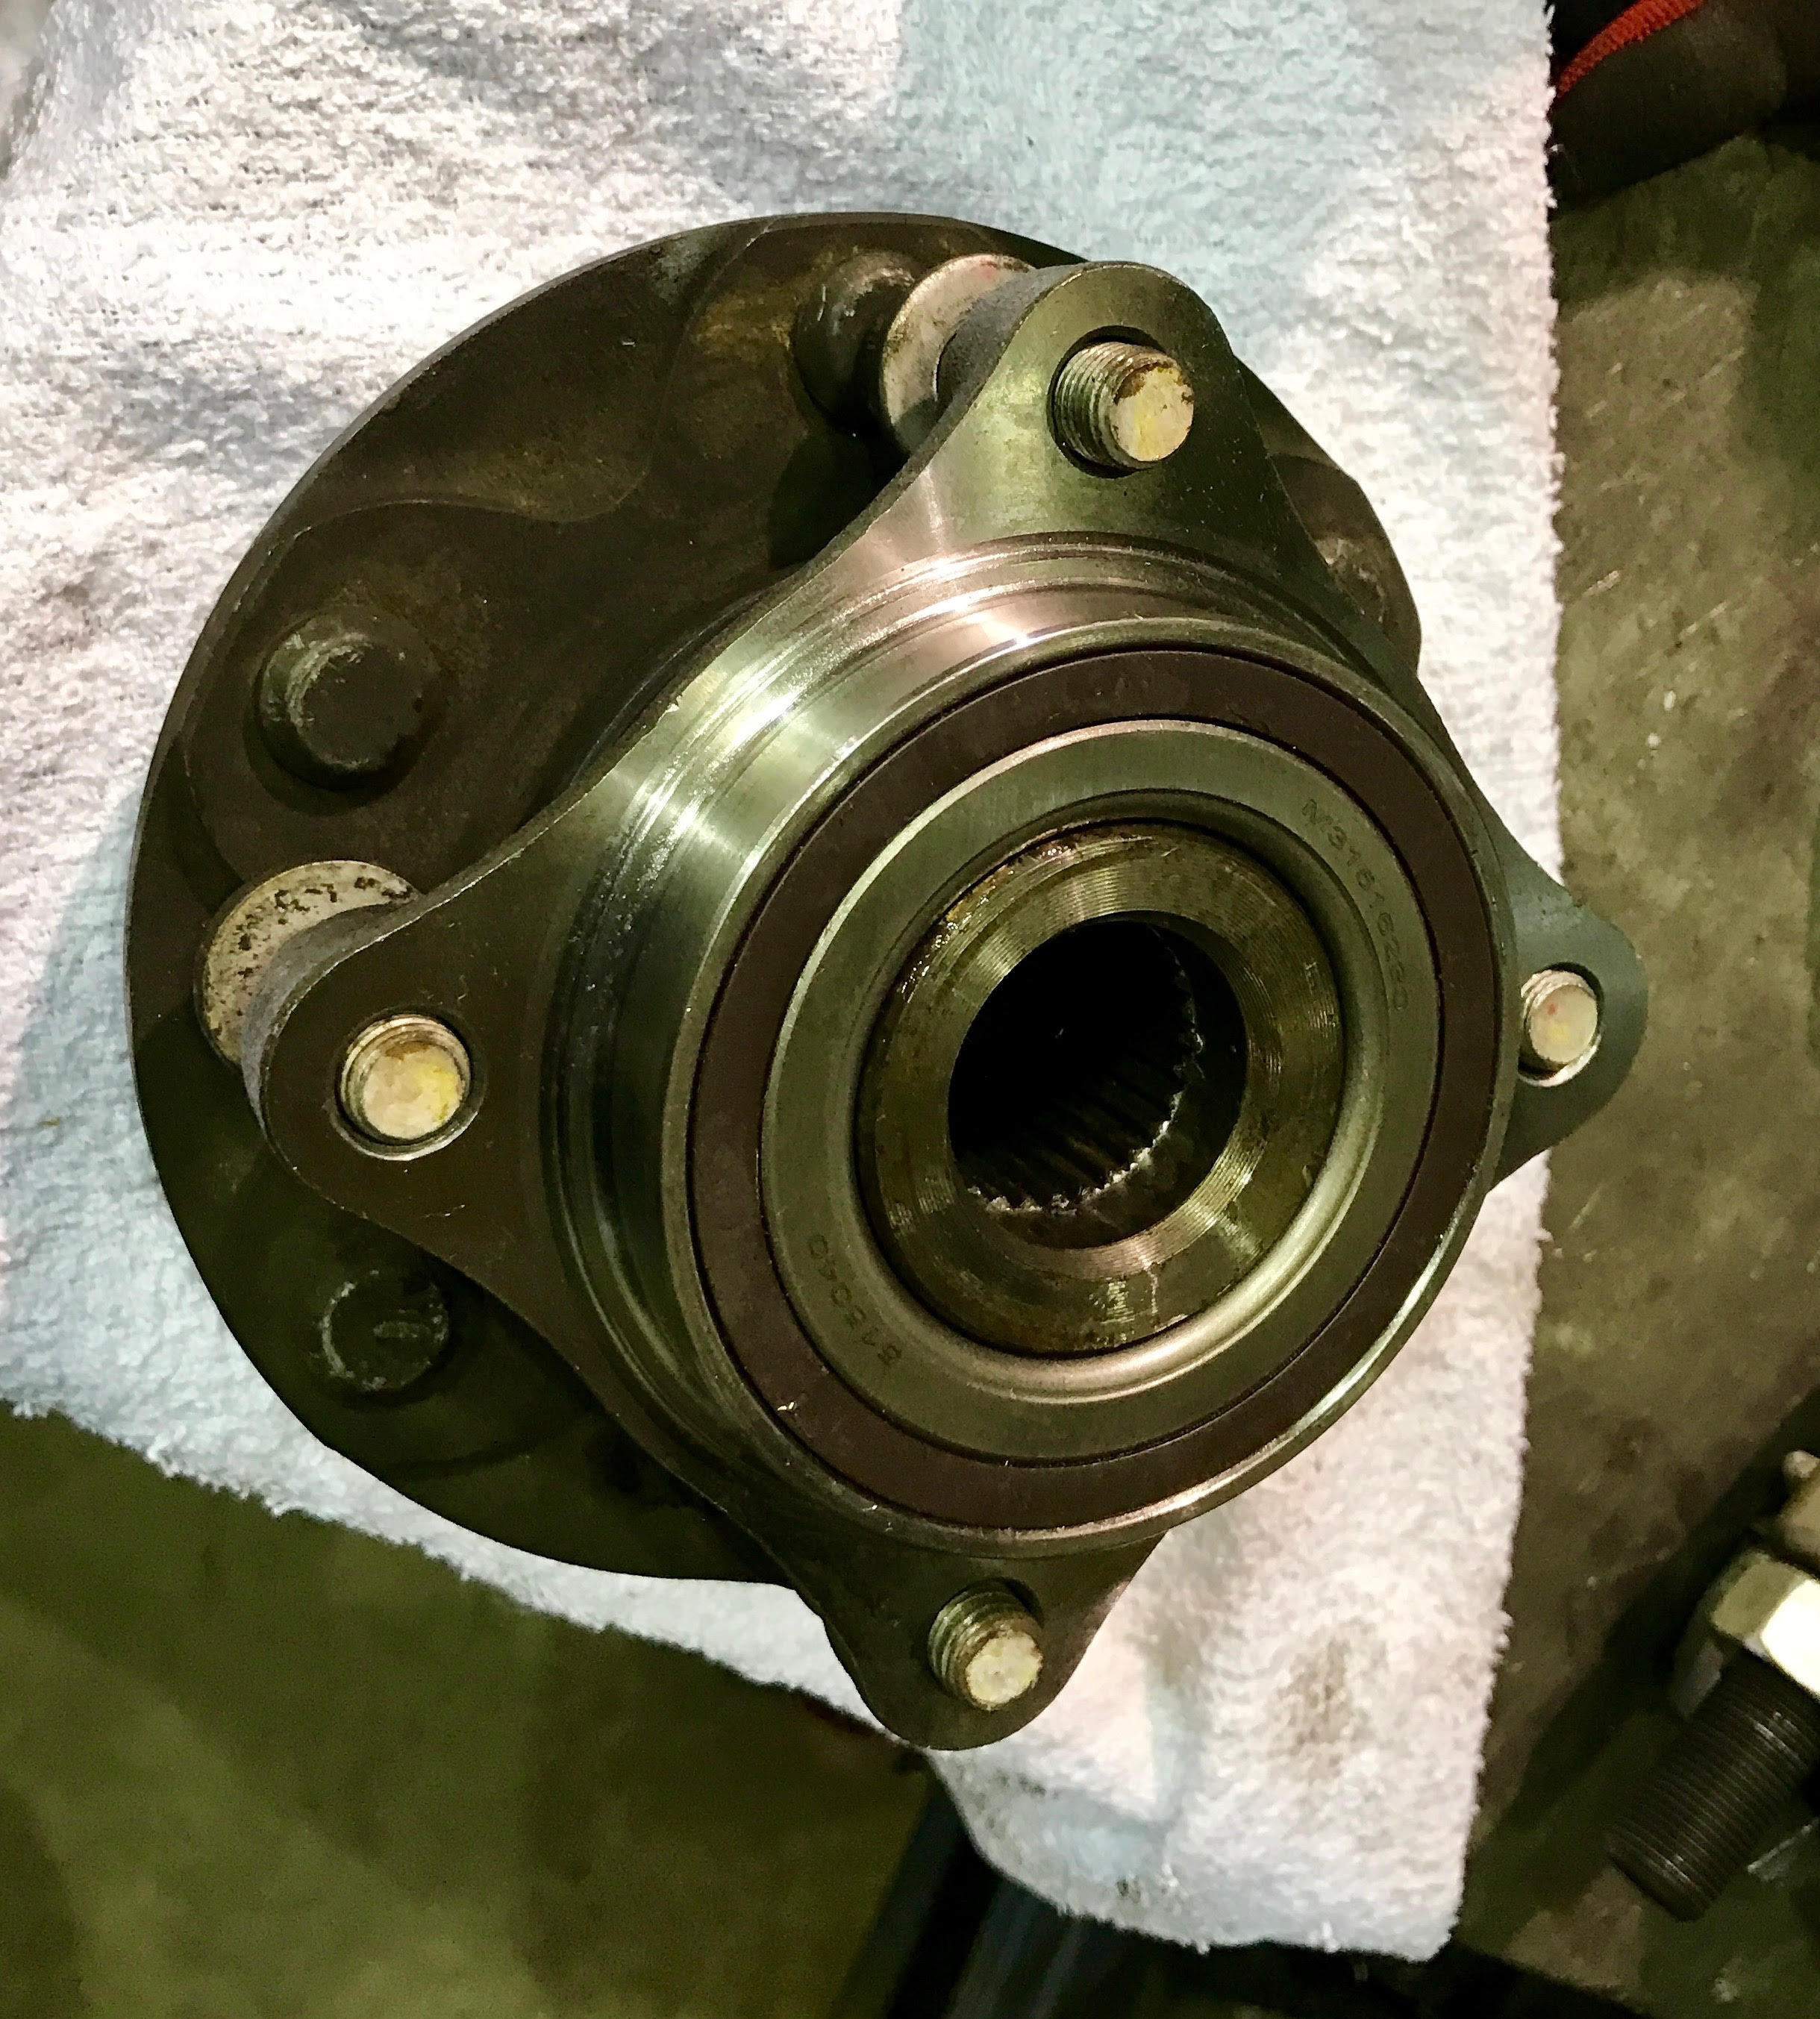 Note: FWD 4-Wheel ABS Left and Right 1996 fits Toyota RAV4 Rear Wheel Bearing and Hub Assembly Included with Two Years Warranty - Two Bearings